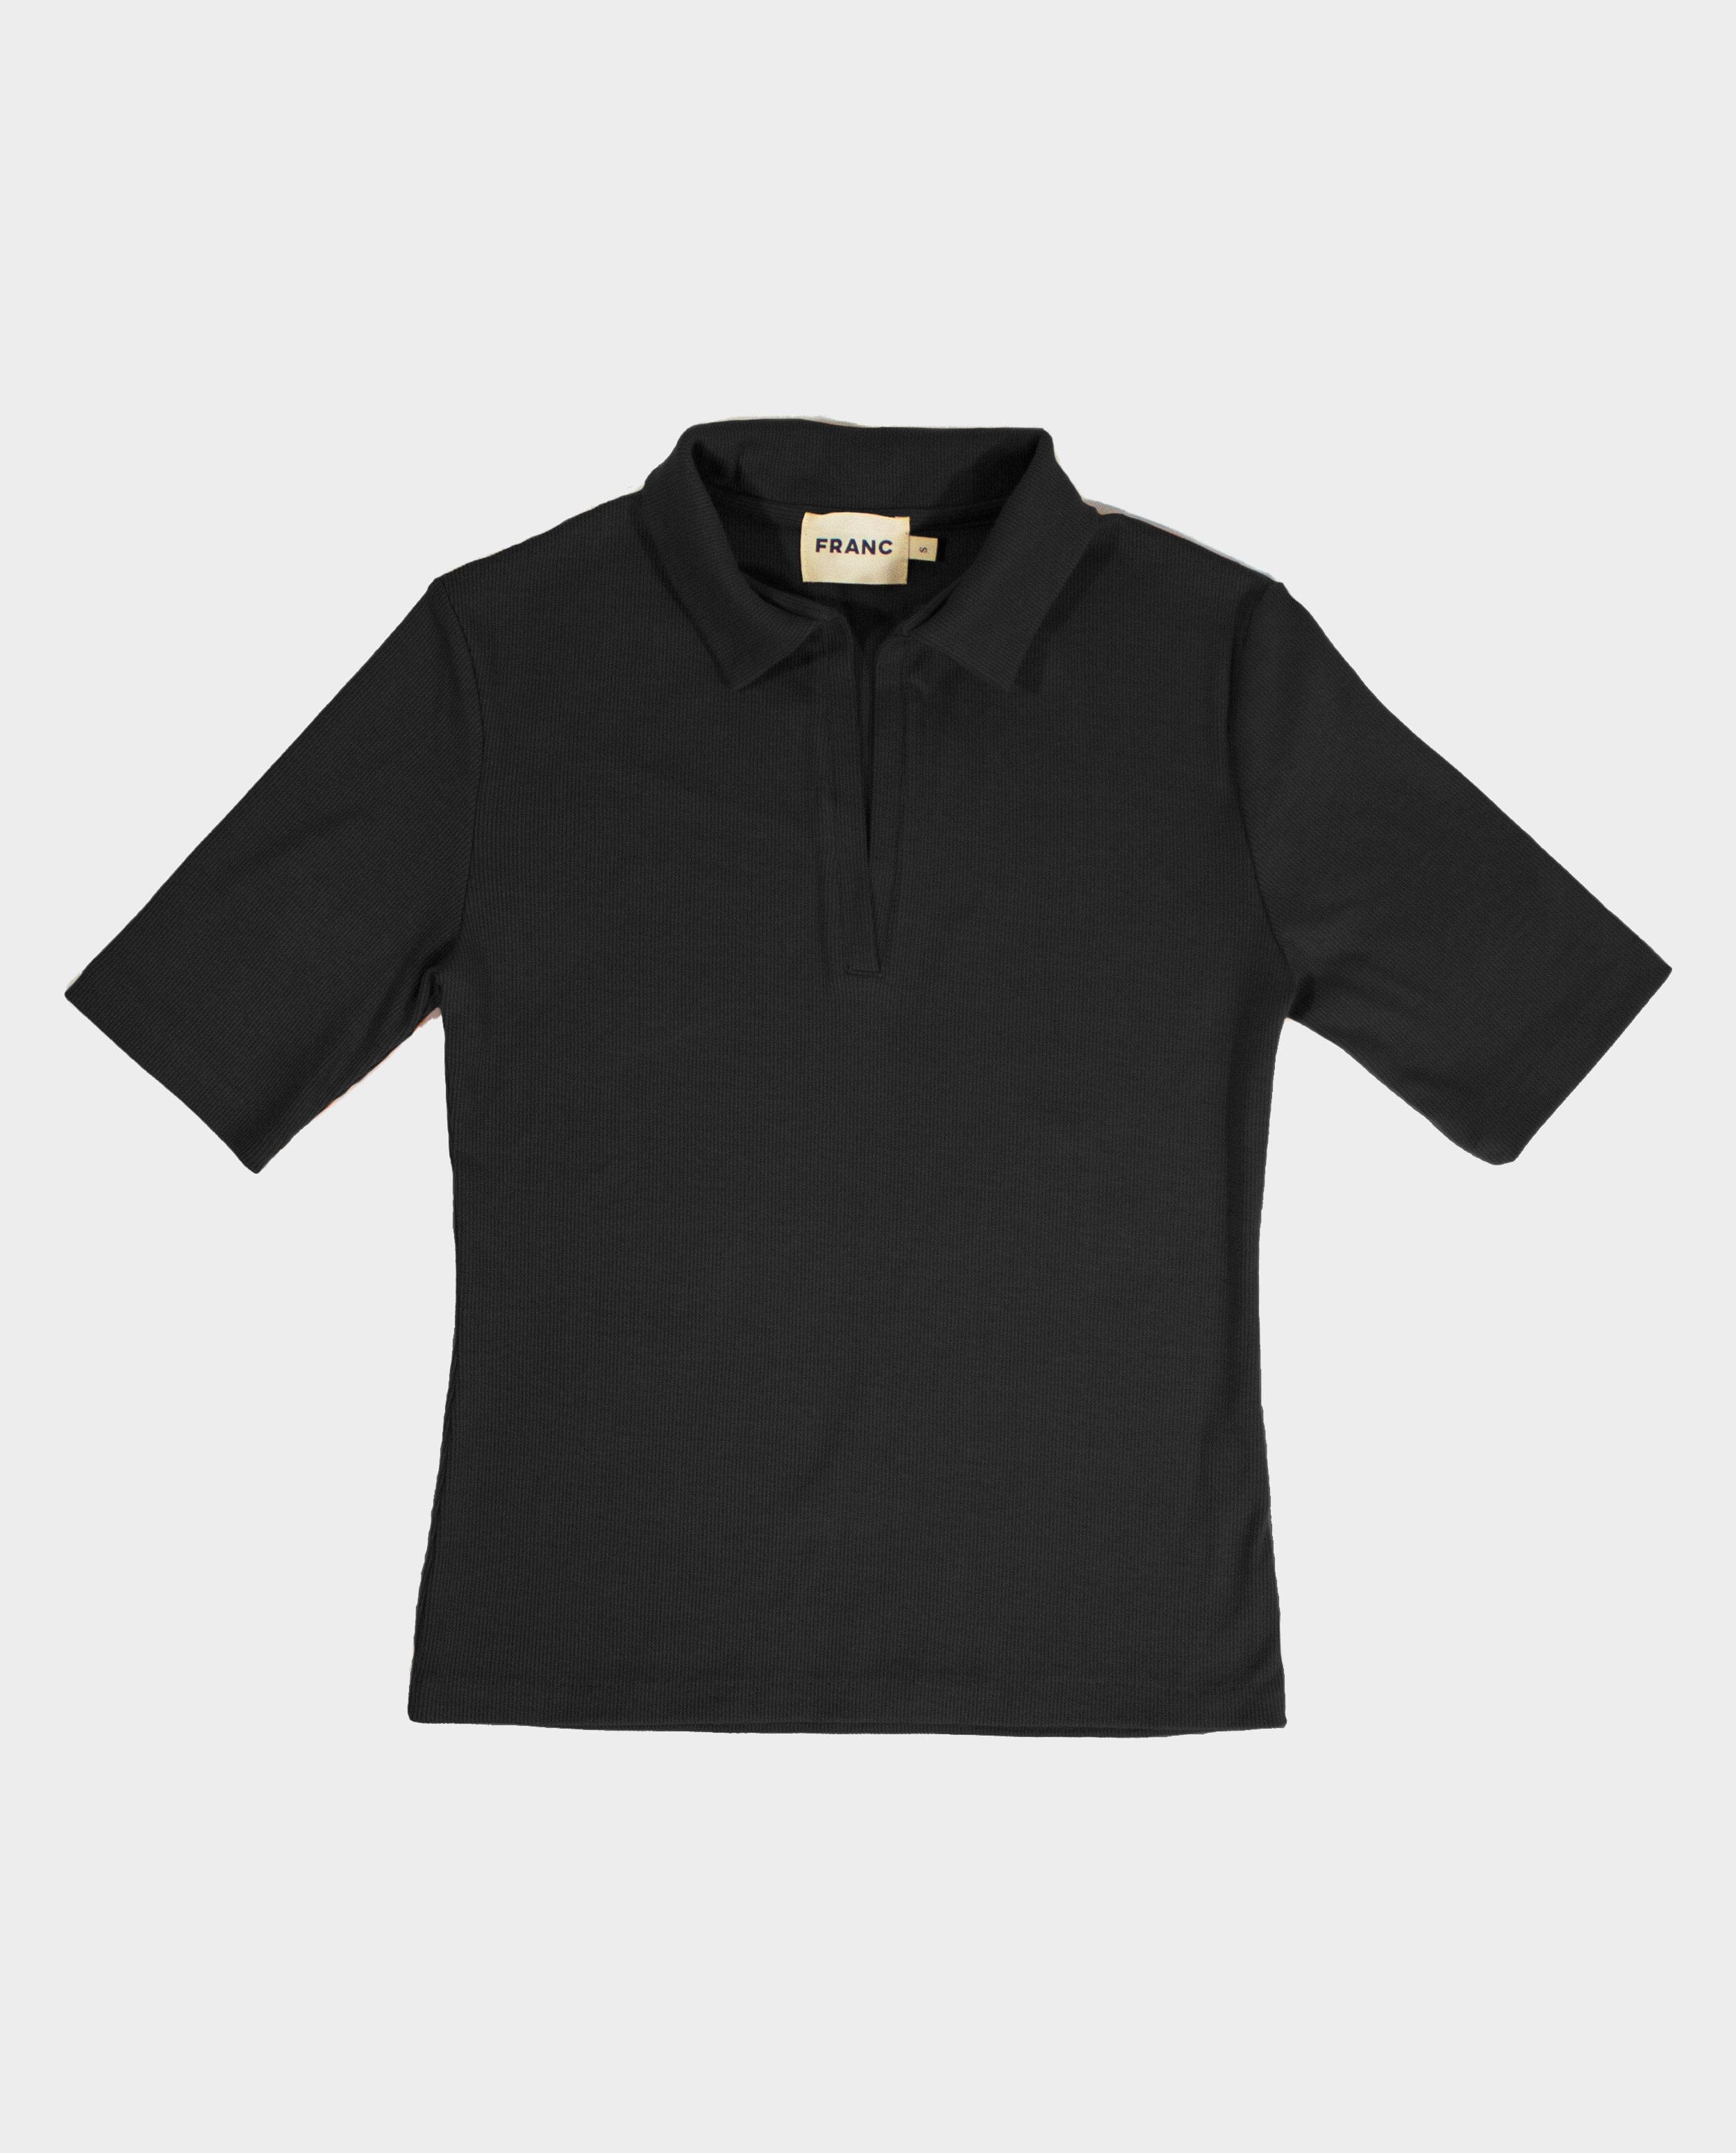 The Rib Polo Shirt in Black | FRANC Sustainable Clothing